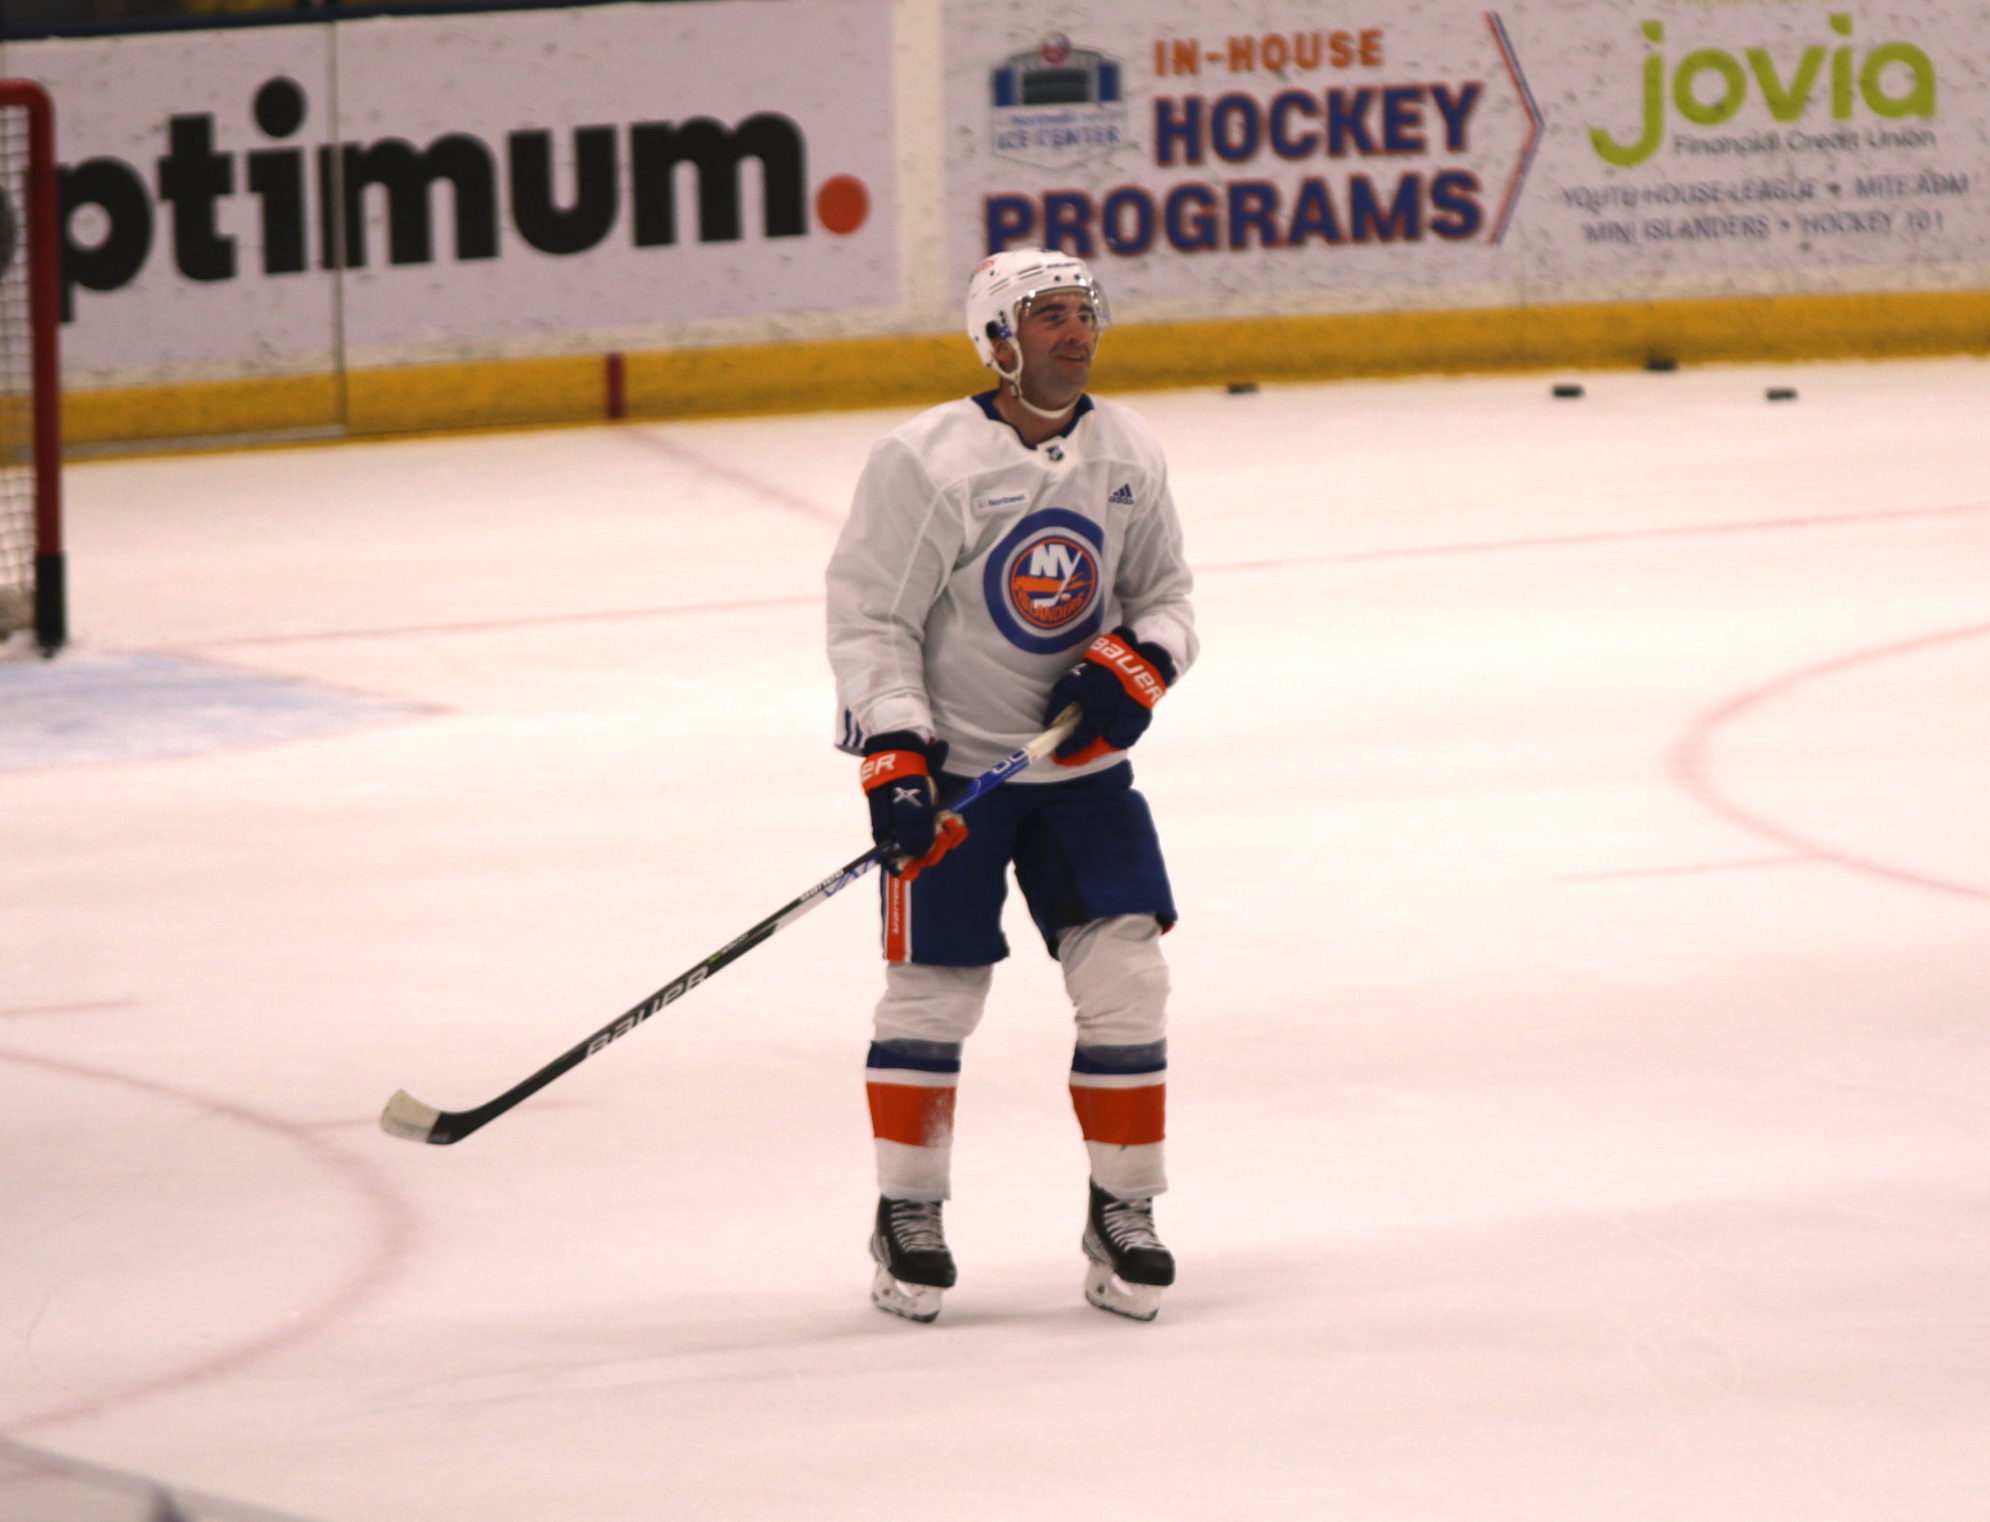 Gross] Maintenance day for Kyle Palmieri, per Isles. Has been skating on  his own, including today. Tweaked something (not specified) during workouts  prior to camp. : r/NewYorkIslanders